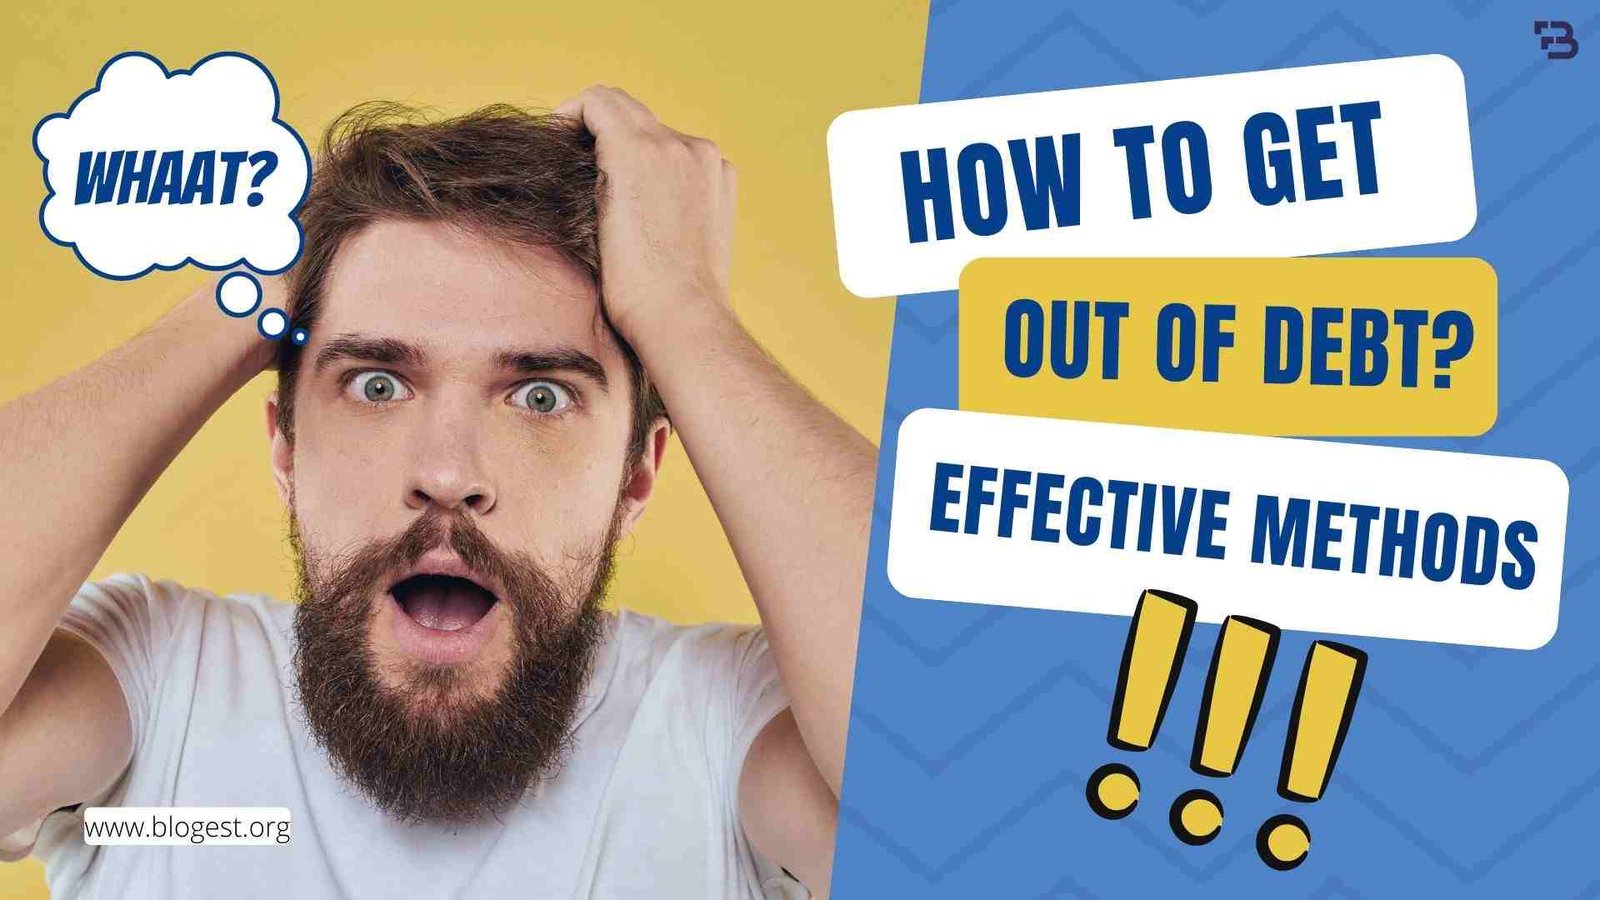 How To Get Out of Debt? (7 Tested & Effective Methods)